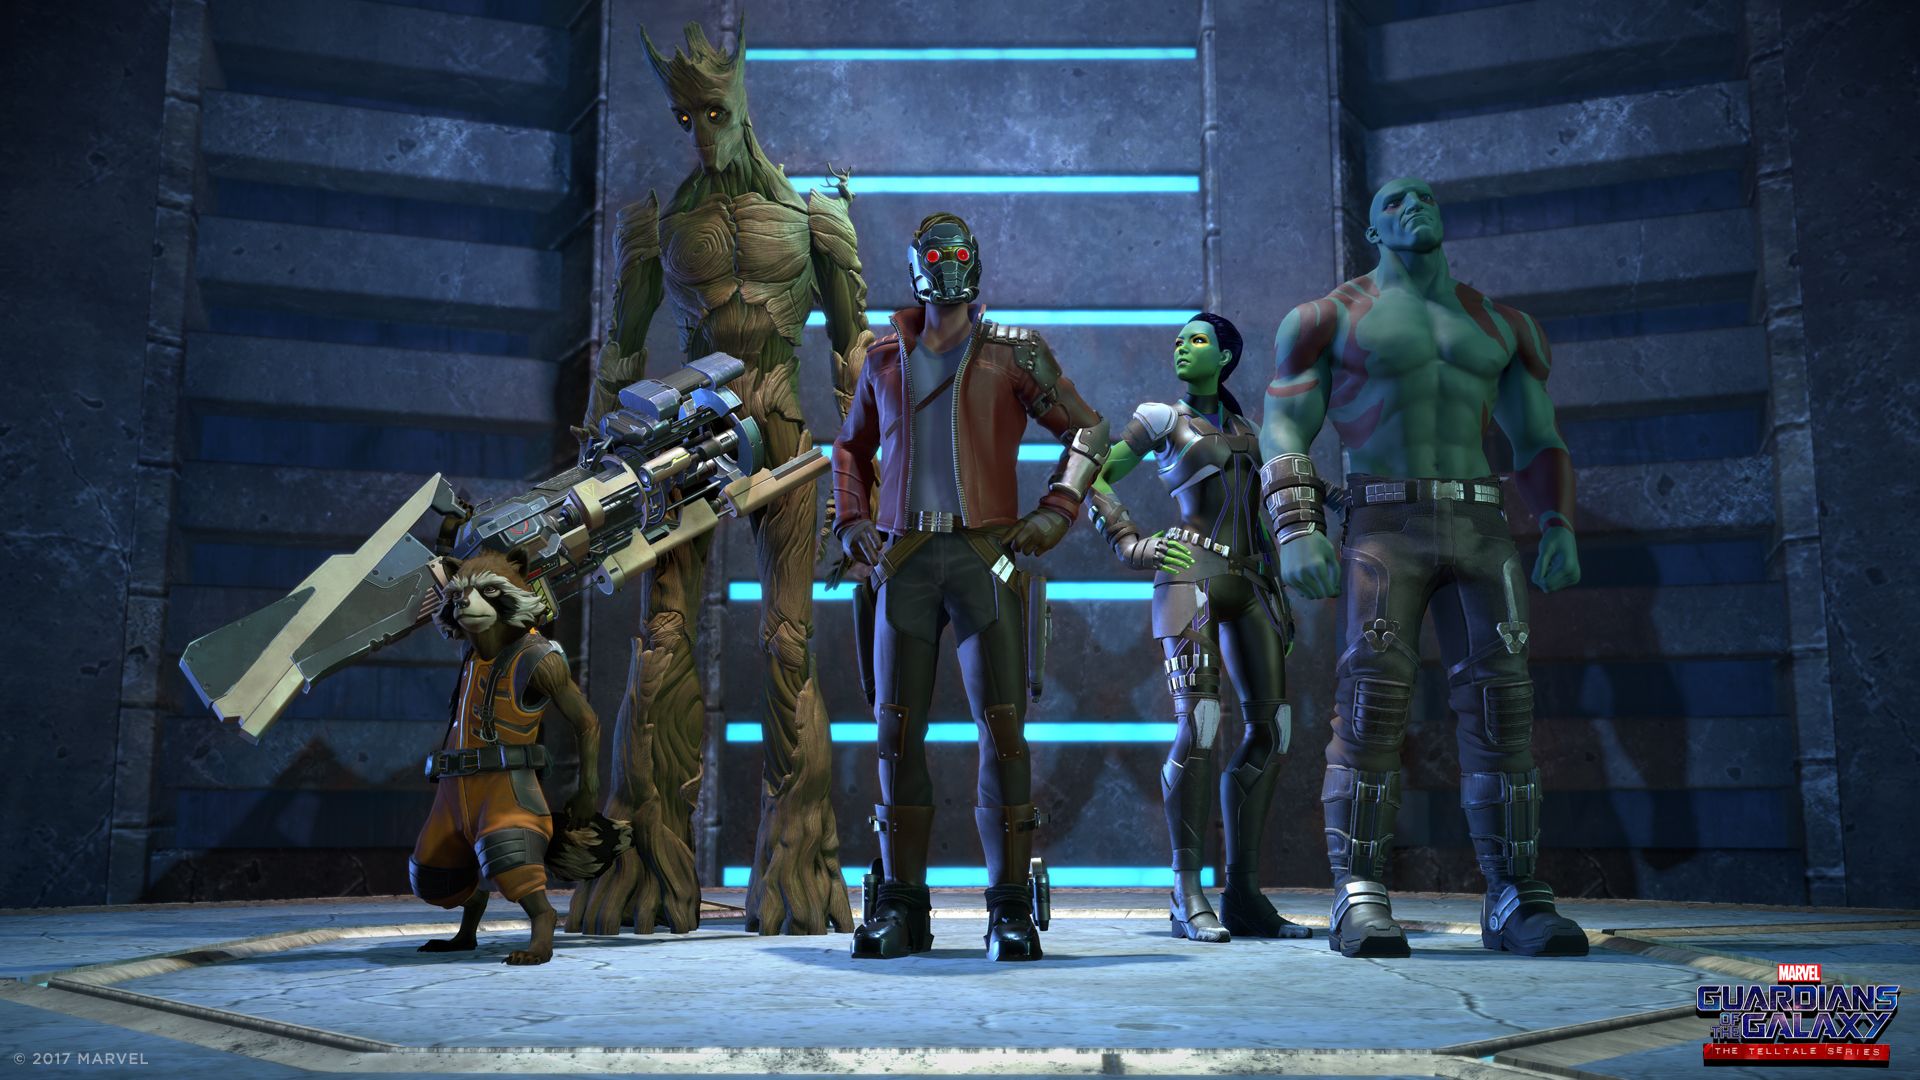 Telltale's Guardians of the Galaxy game debuts this spring